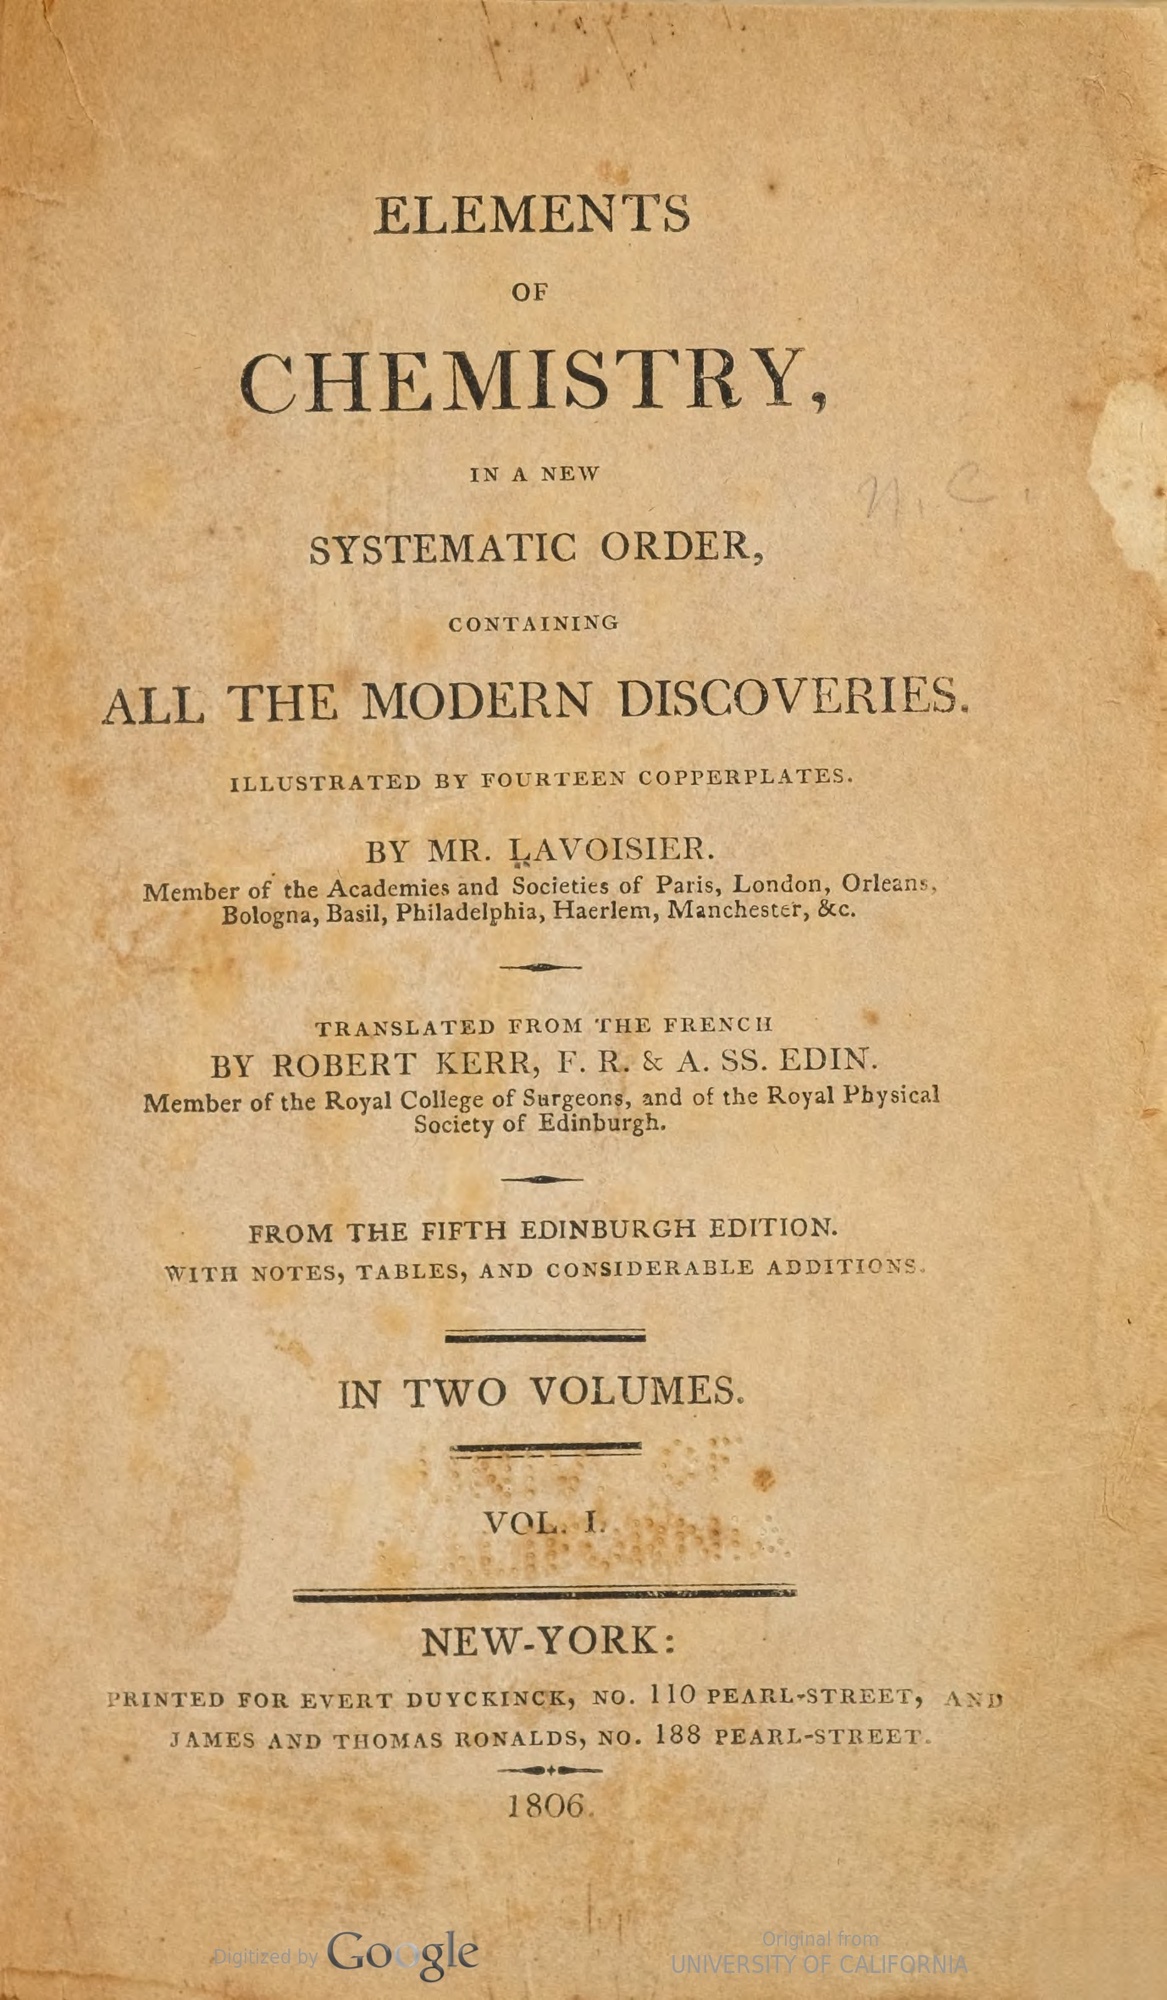 Title page for Elements of Chemistry